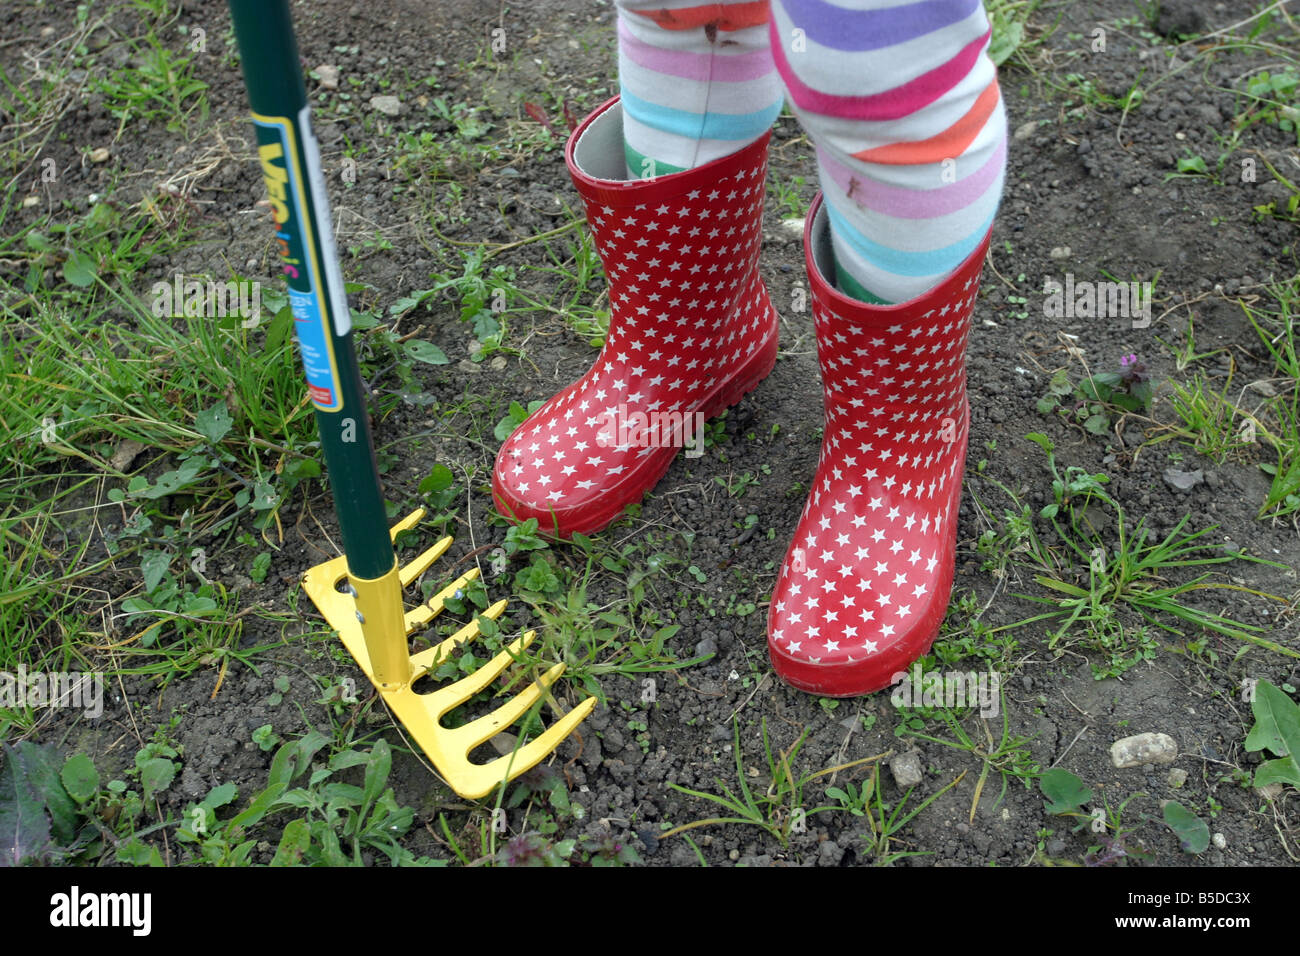 Young Girl wearing red Welly bottes sur un allotissement Banque D'Images